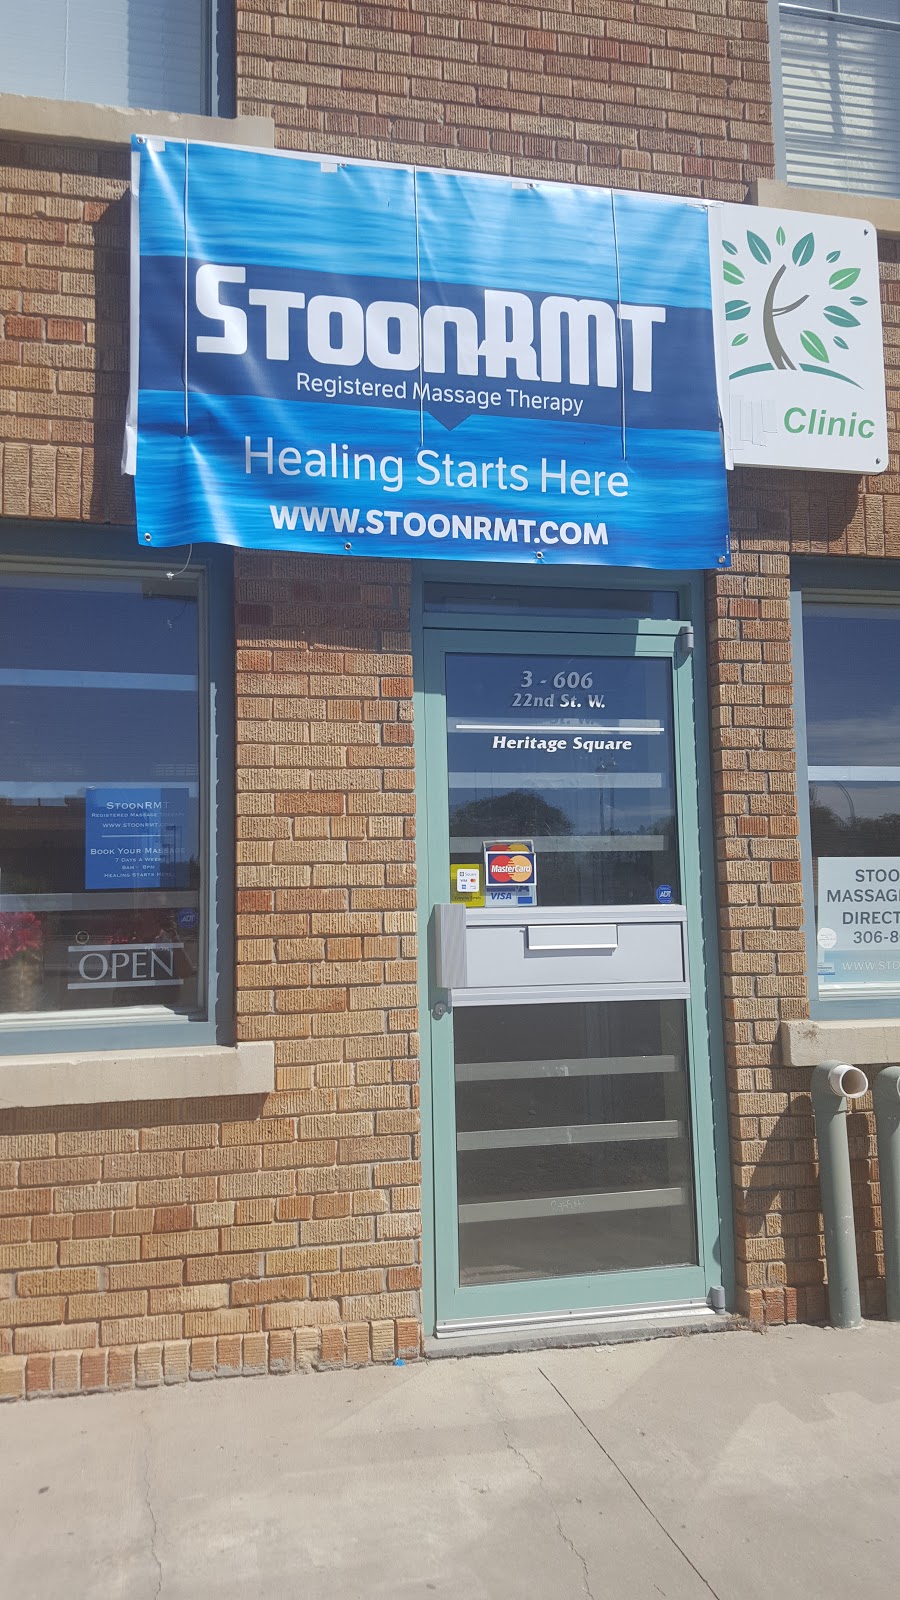 StoonRMT - Registered Massage Therapy & Acupuncture | gym | 606 22 St W #3, Saskatoon, SK S7M 5W1, Canada | 3069541588 OR +1 306-954-1588